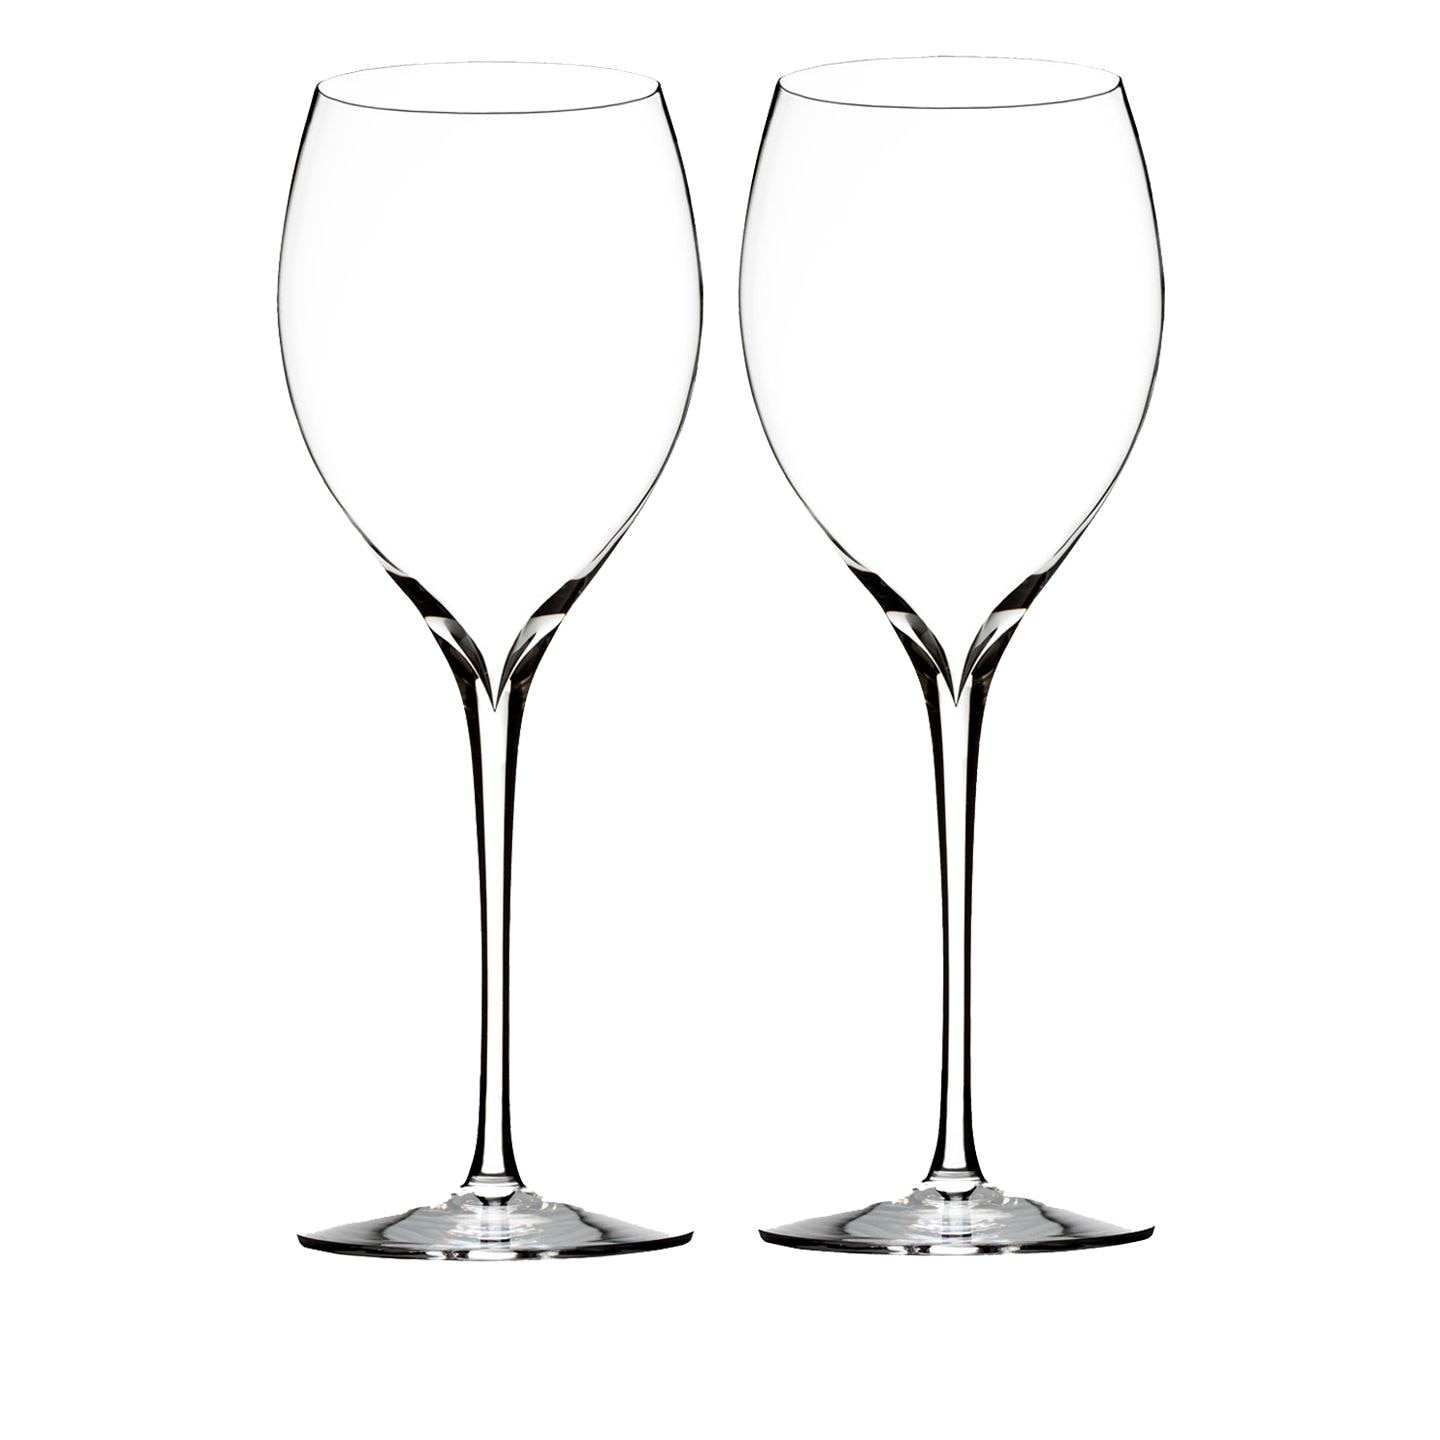 Concours d'Elegance Set of 2 White Wine Glasses